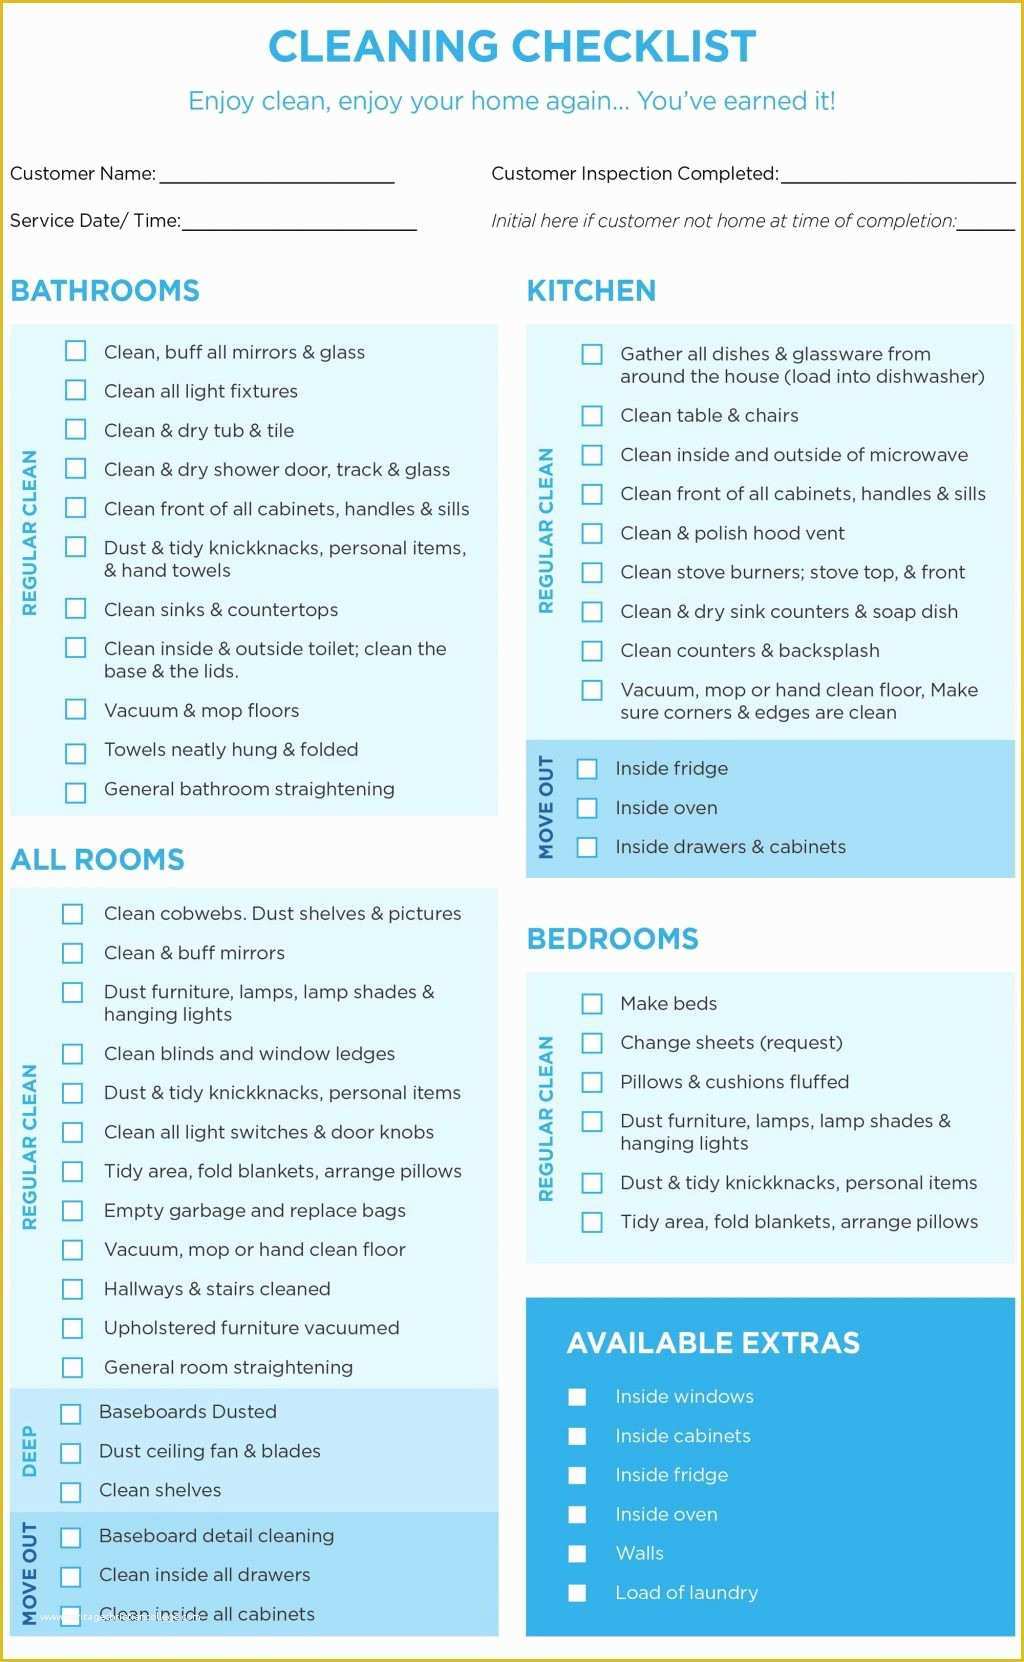 Free Professional House Cleaning Checklist Template Of 40 Helpful House Cleaning Checklists for You